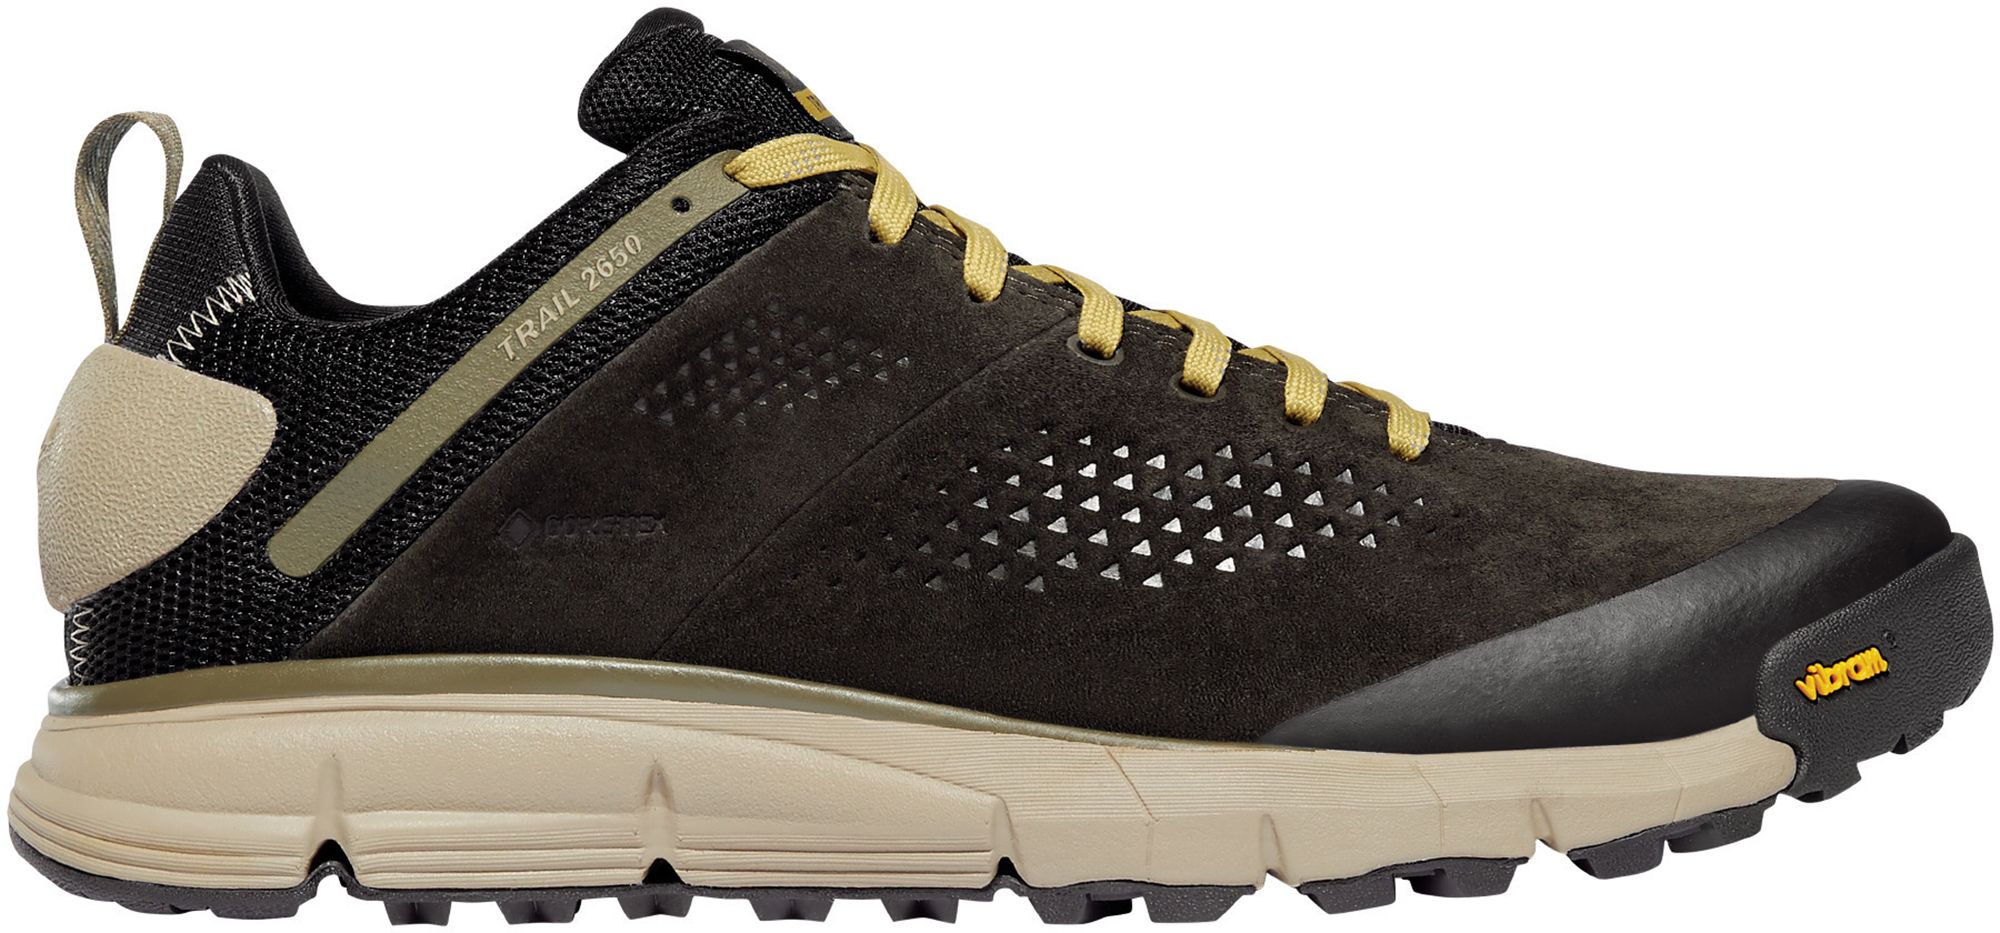 Photos - Trekking Shoes Danner Men's Trail 2650 GTX Hiking Shoes, Size 10, Black Olive/Yellow | Fa 